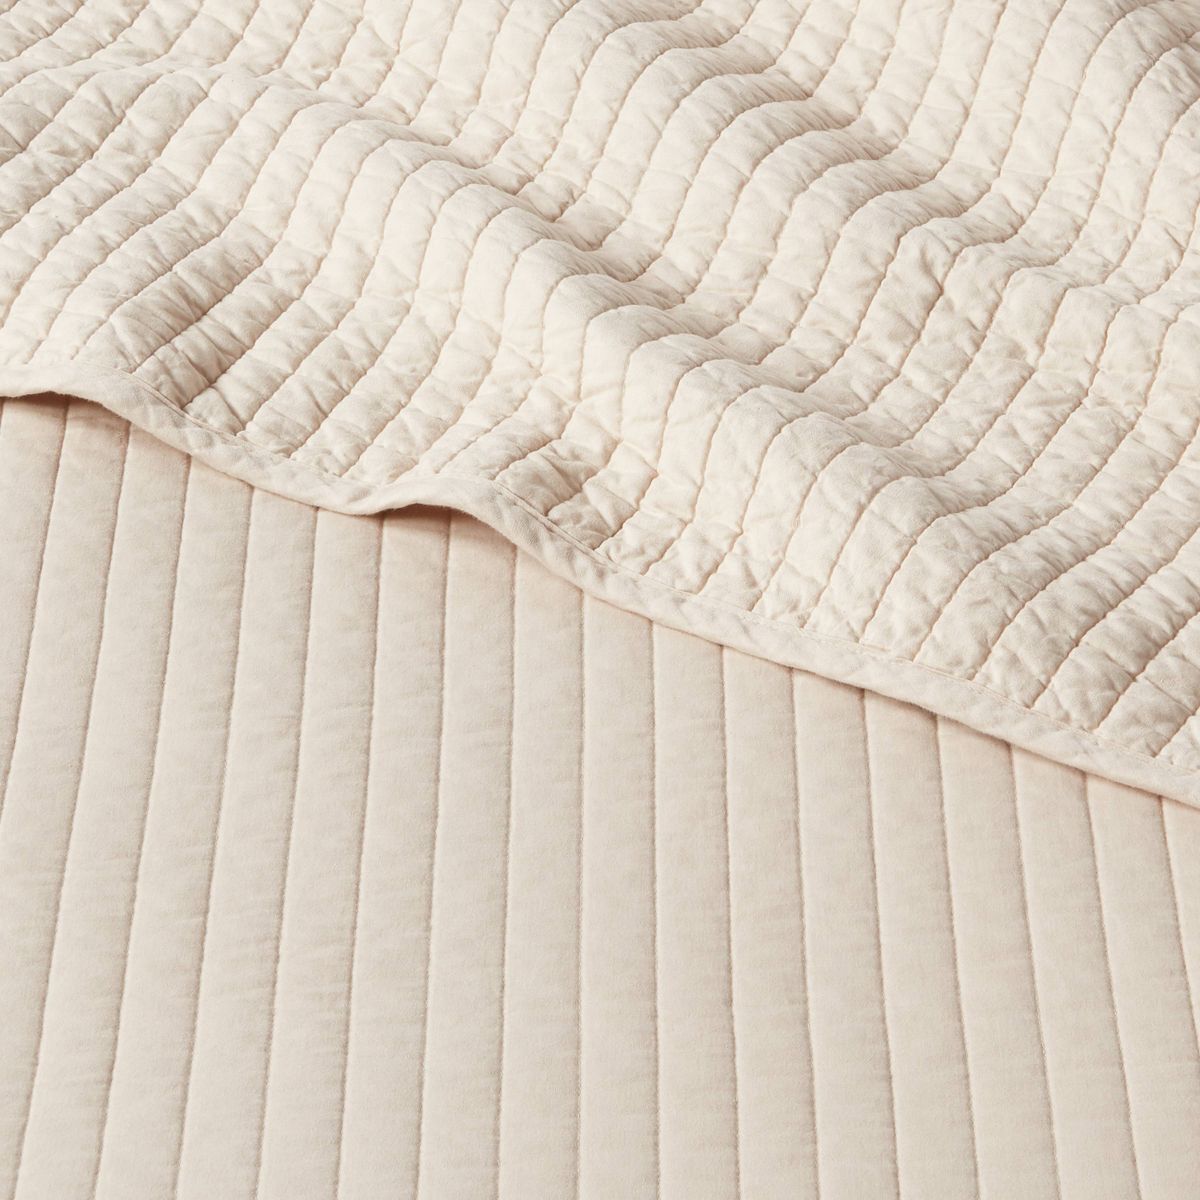 Washed Cotton Sateen Quilt - Threshold™ | Target